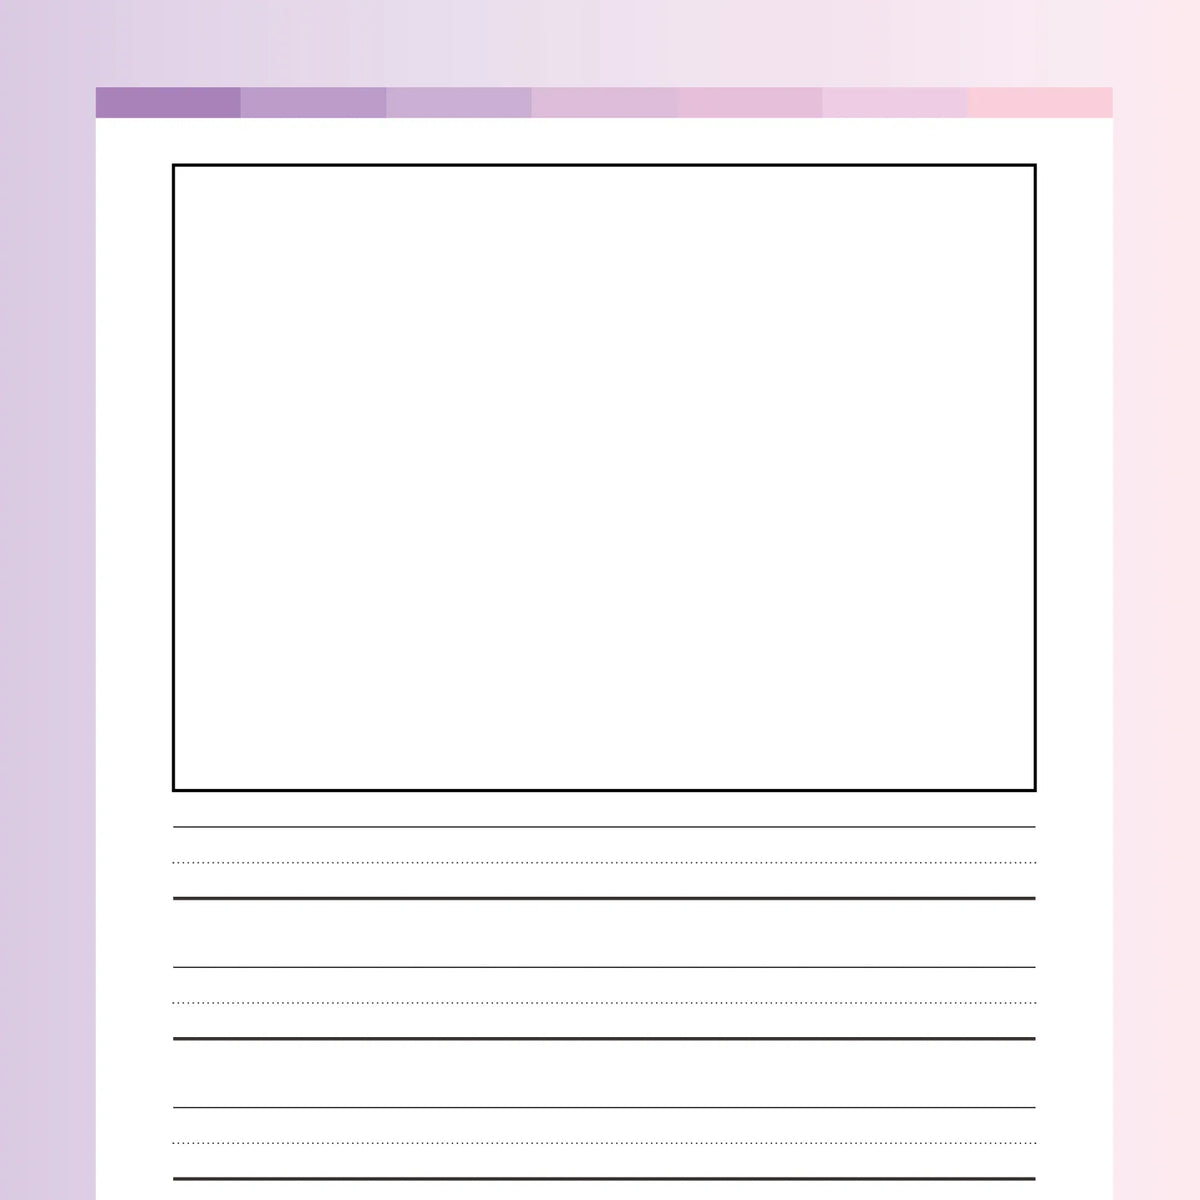 Lined Printable A4 paper, letter writing, personal use only.